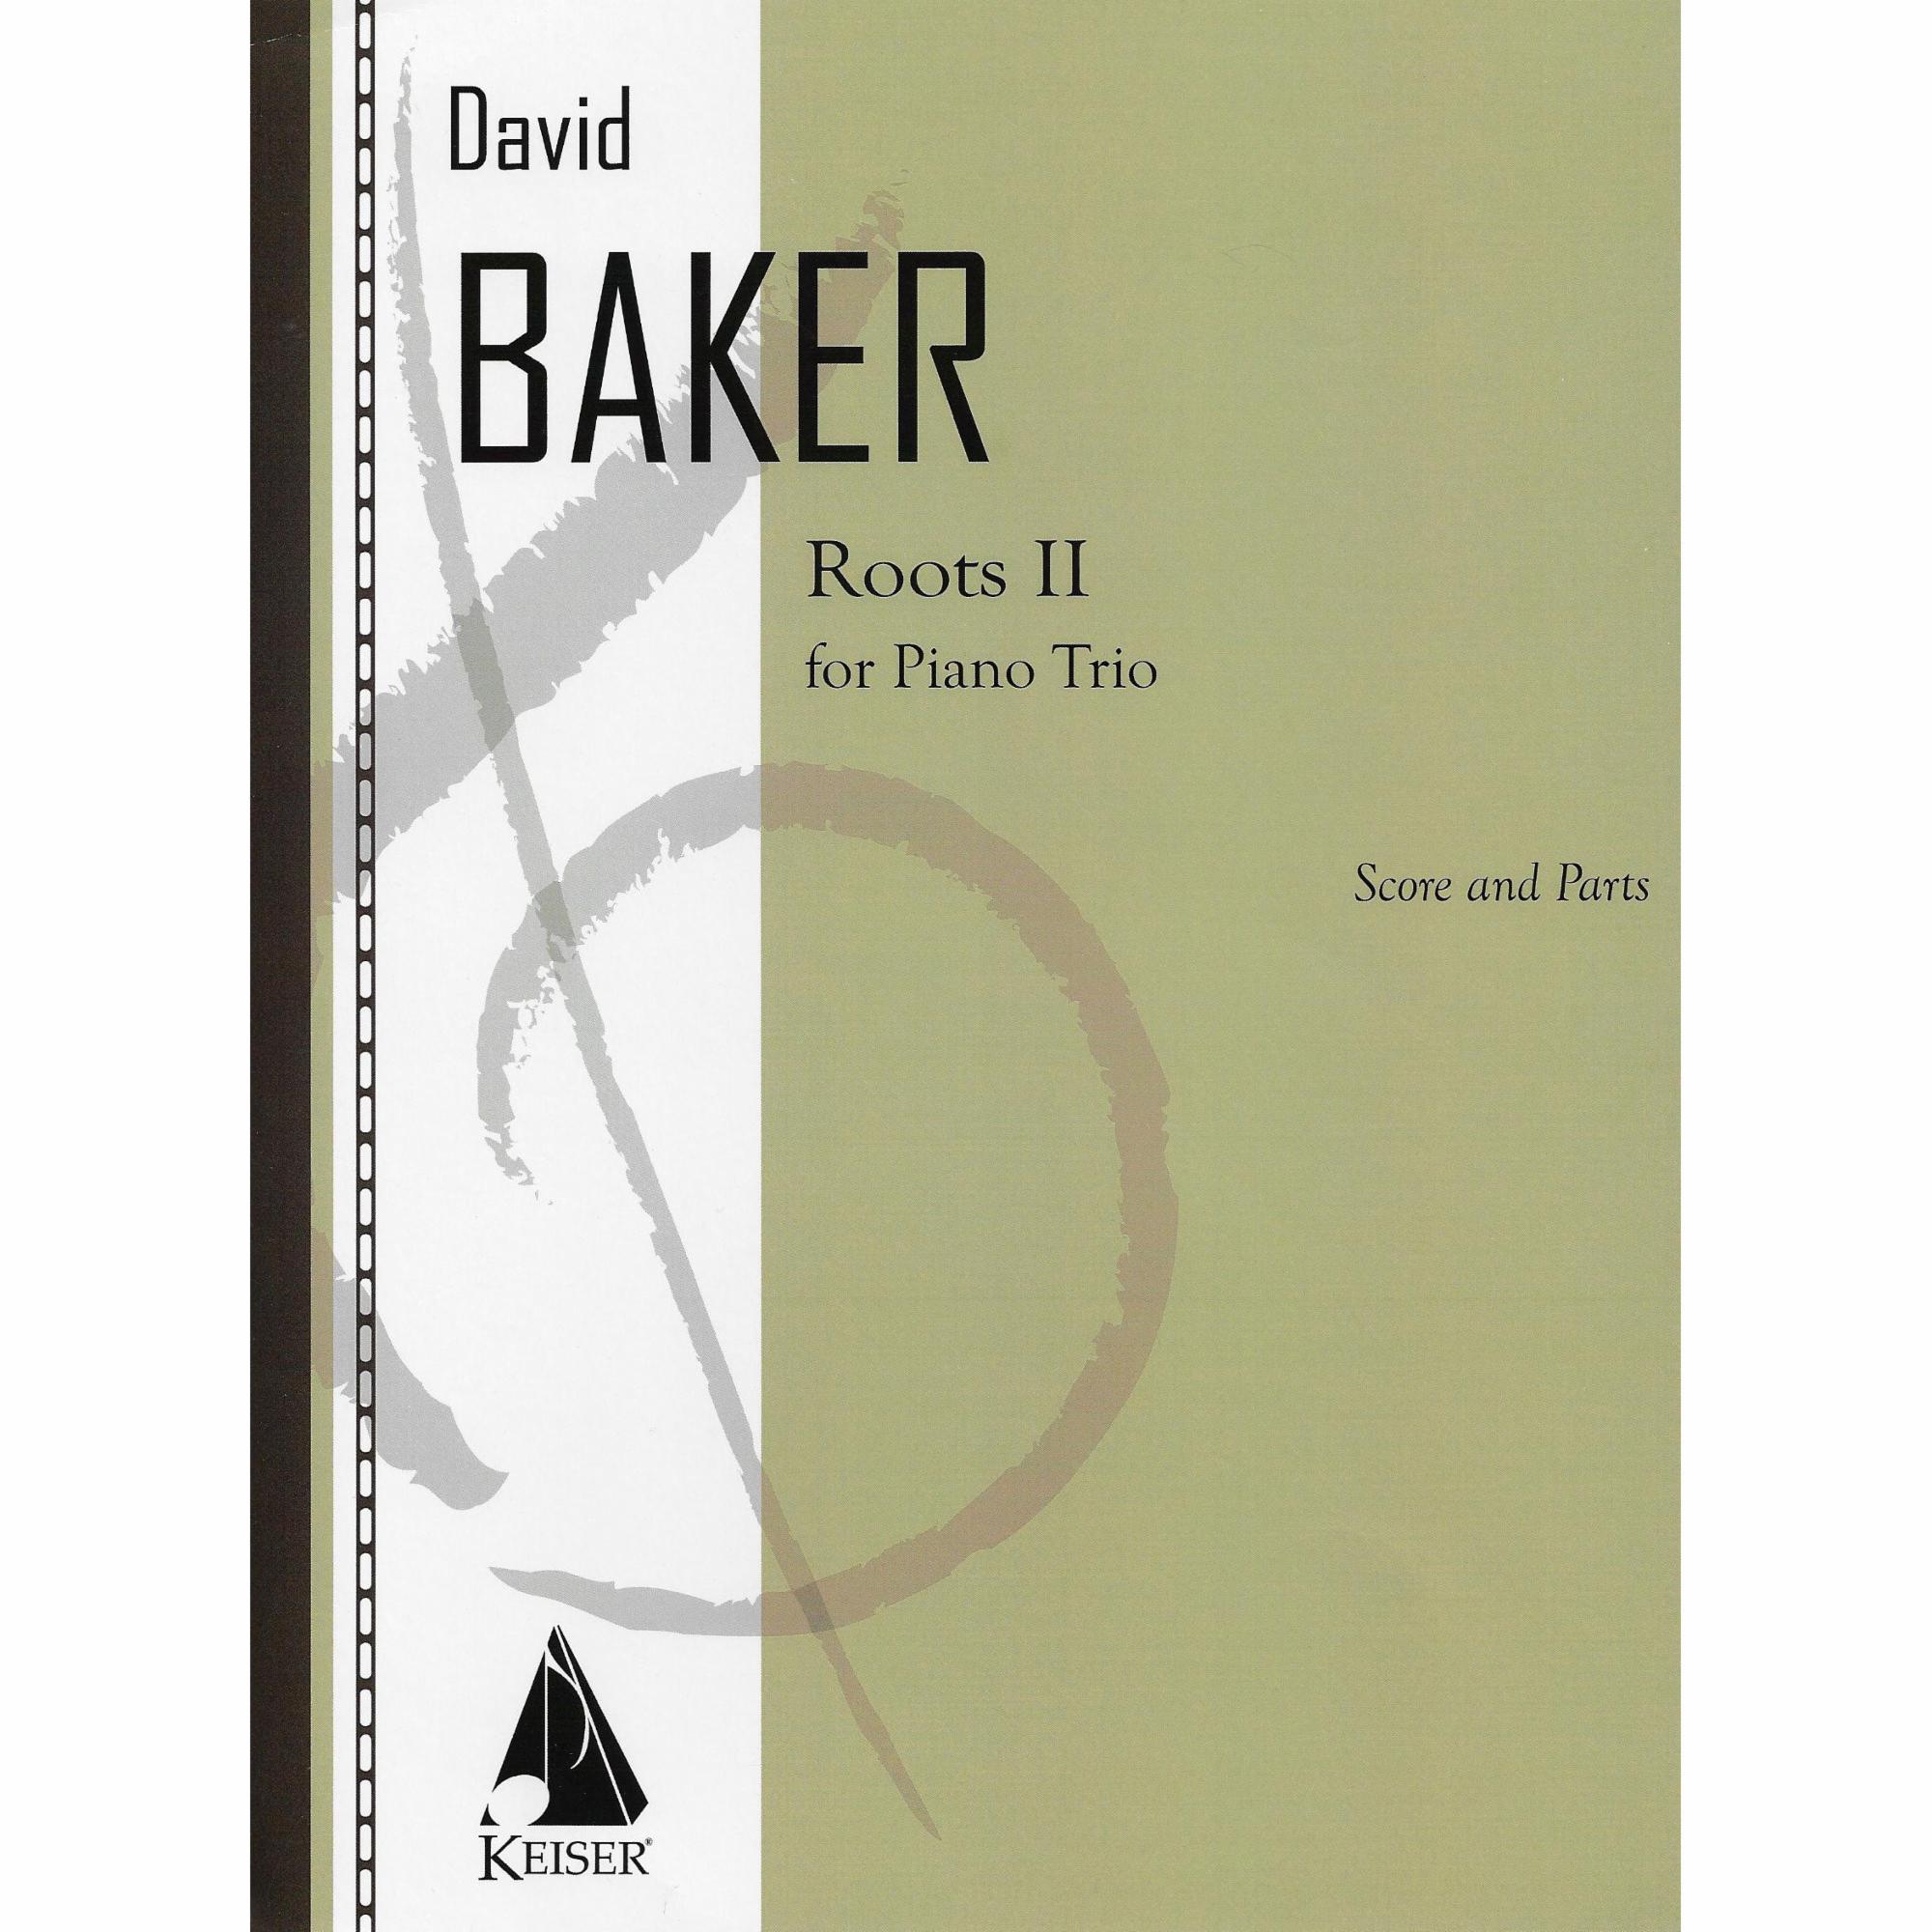 Baker -- Roots II for Piano Trio